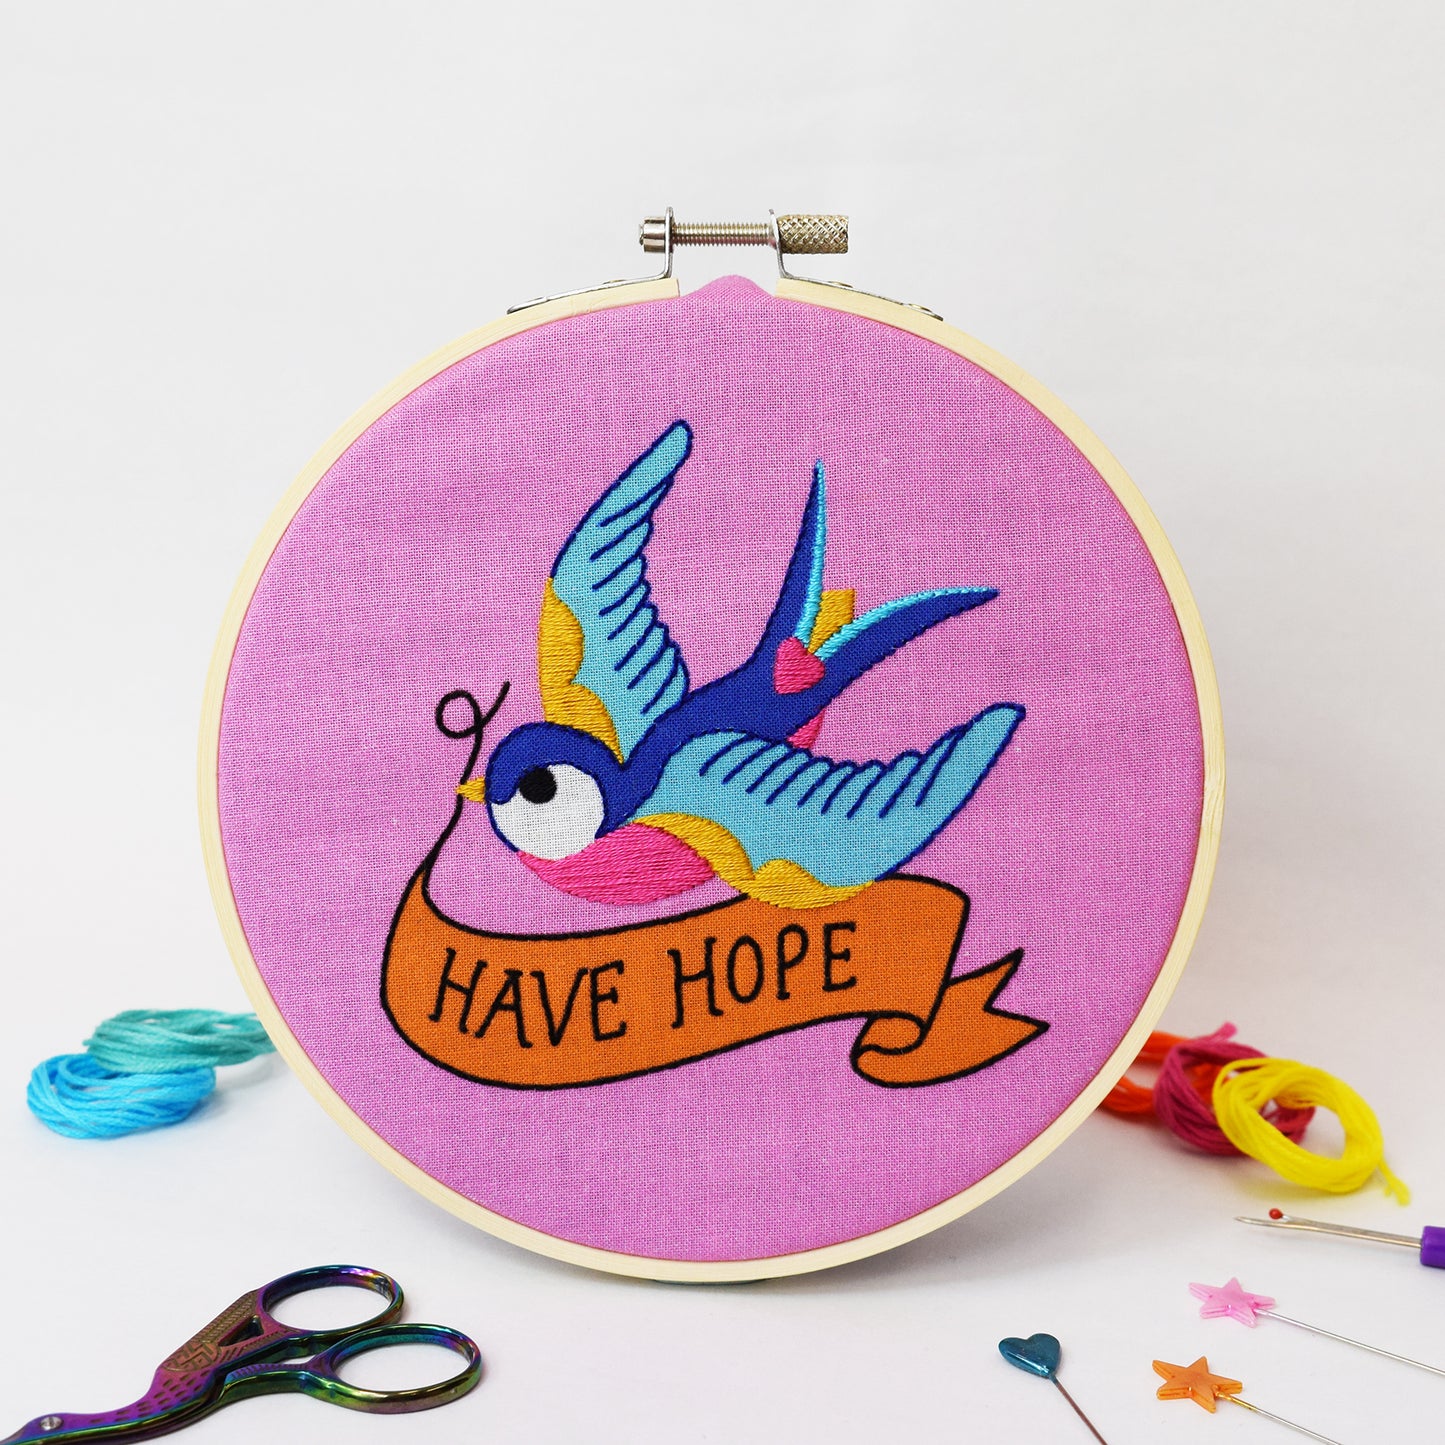 'Have Hope' Large Embroidery Craft Kit